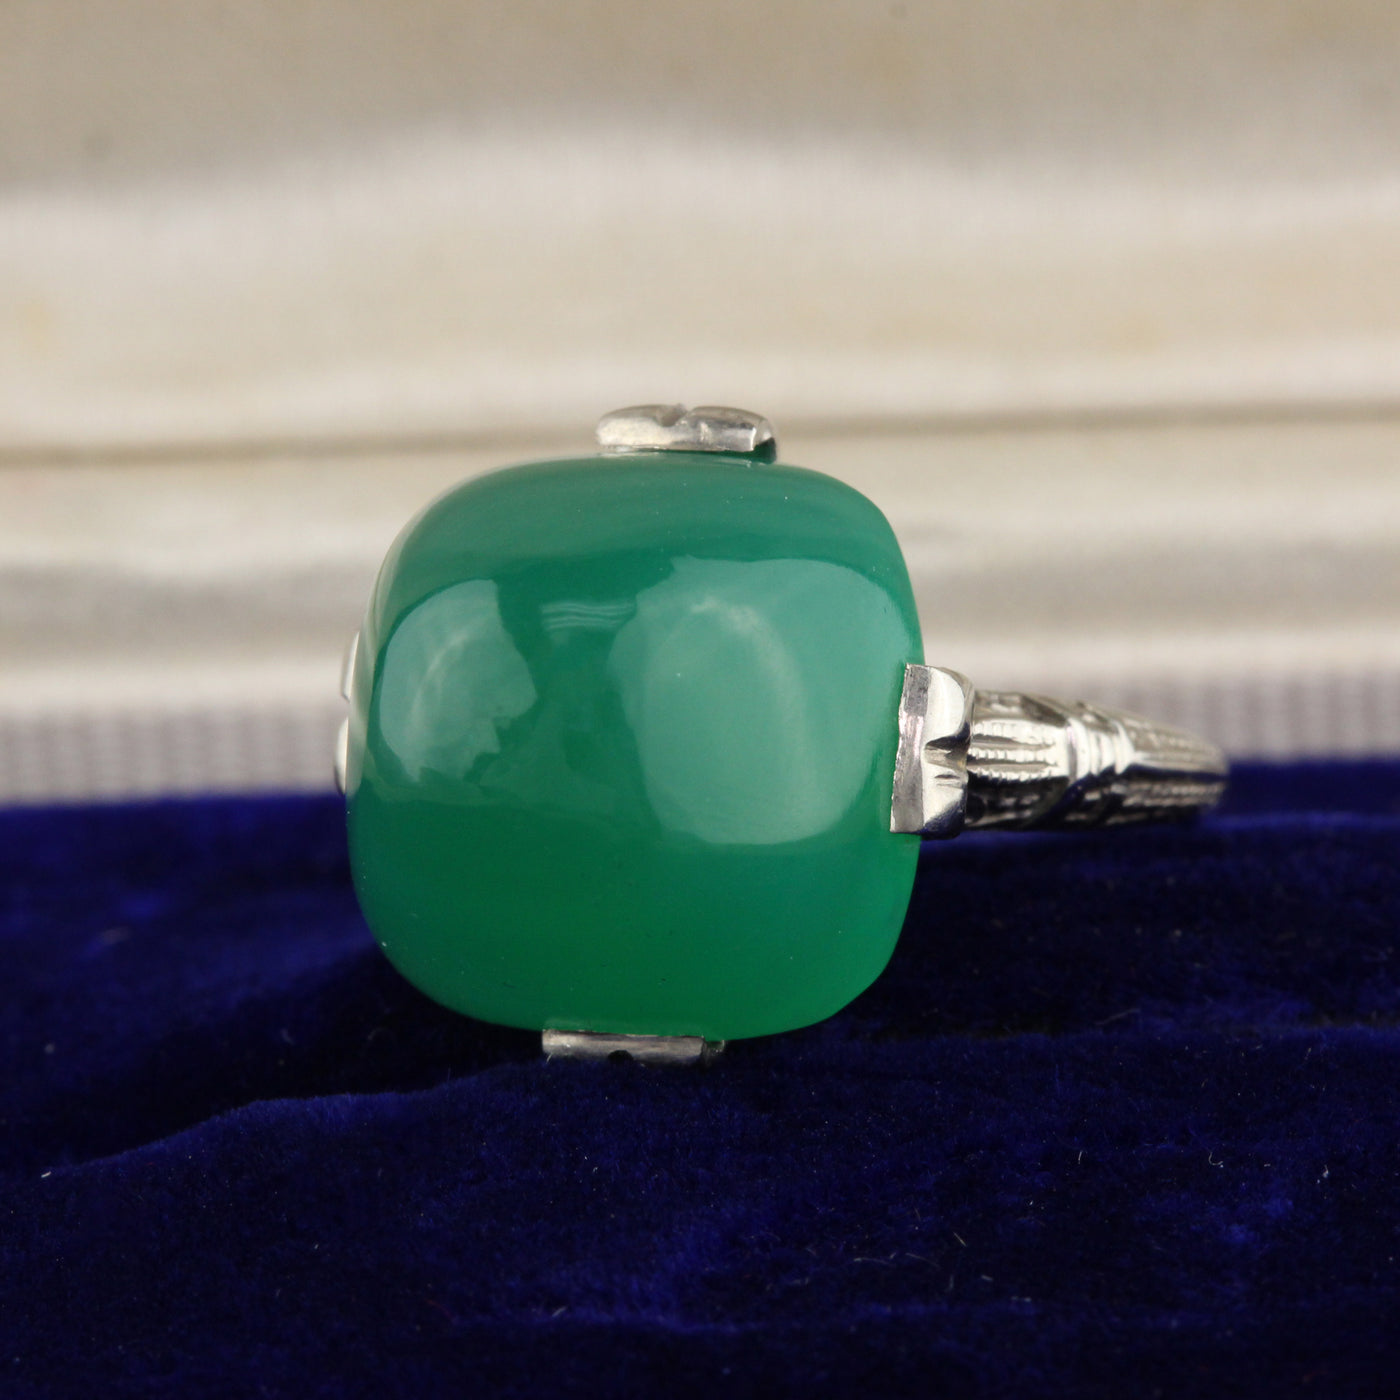 Antique Art Deco 14K White Gold & Chalcedony Cocktail Ring - The Antique Parlour